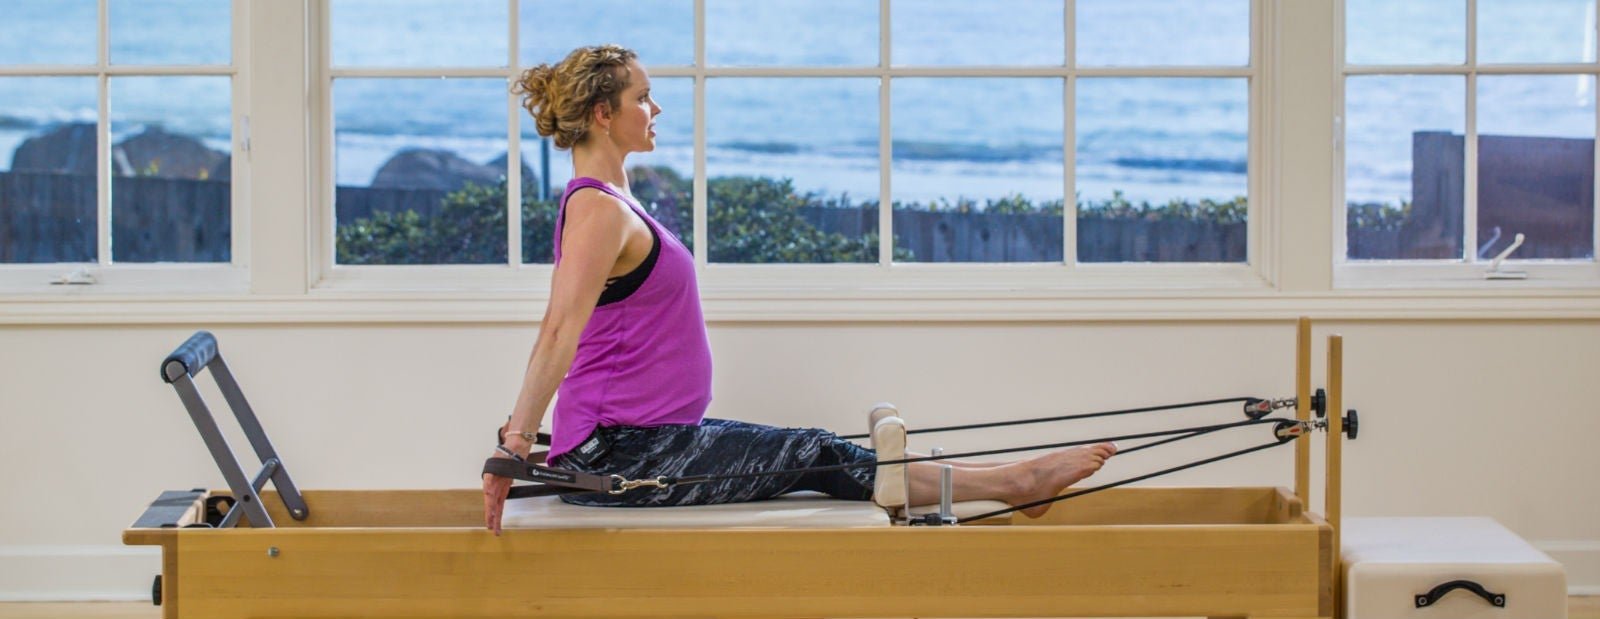 BENEFITS OF PILATES: 8 REASONS EVERY WOMAN SHOULD TRY PILATES